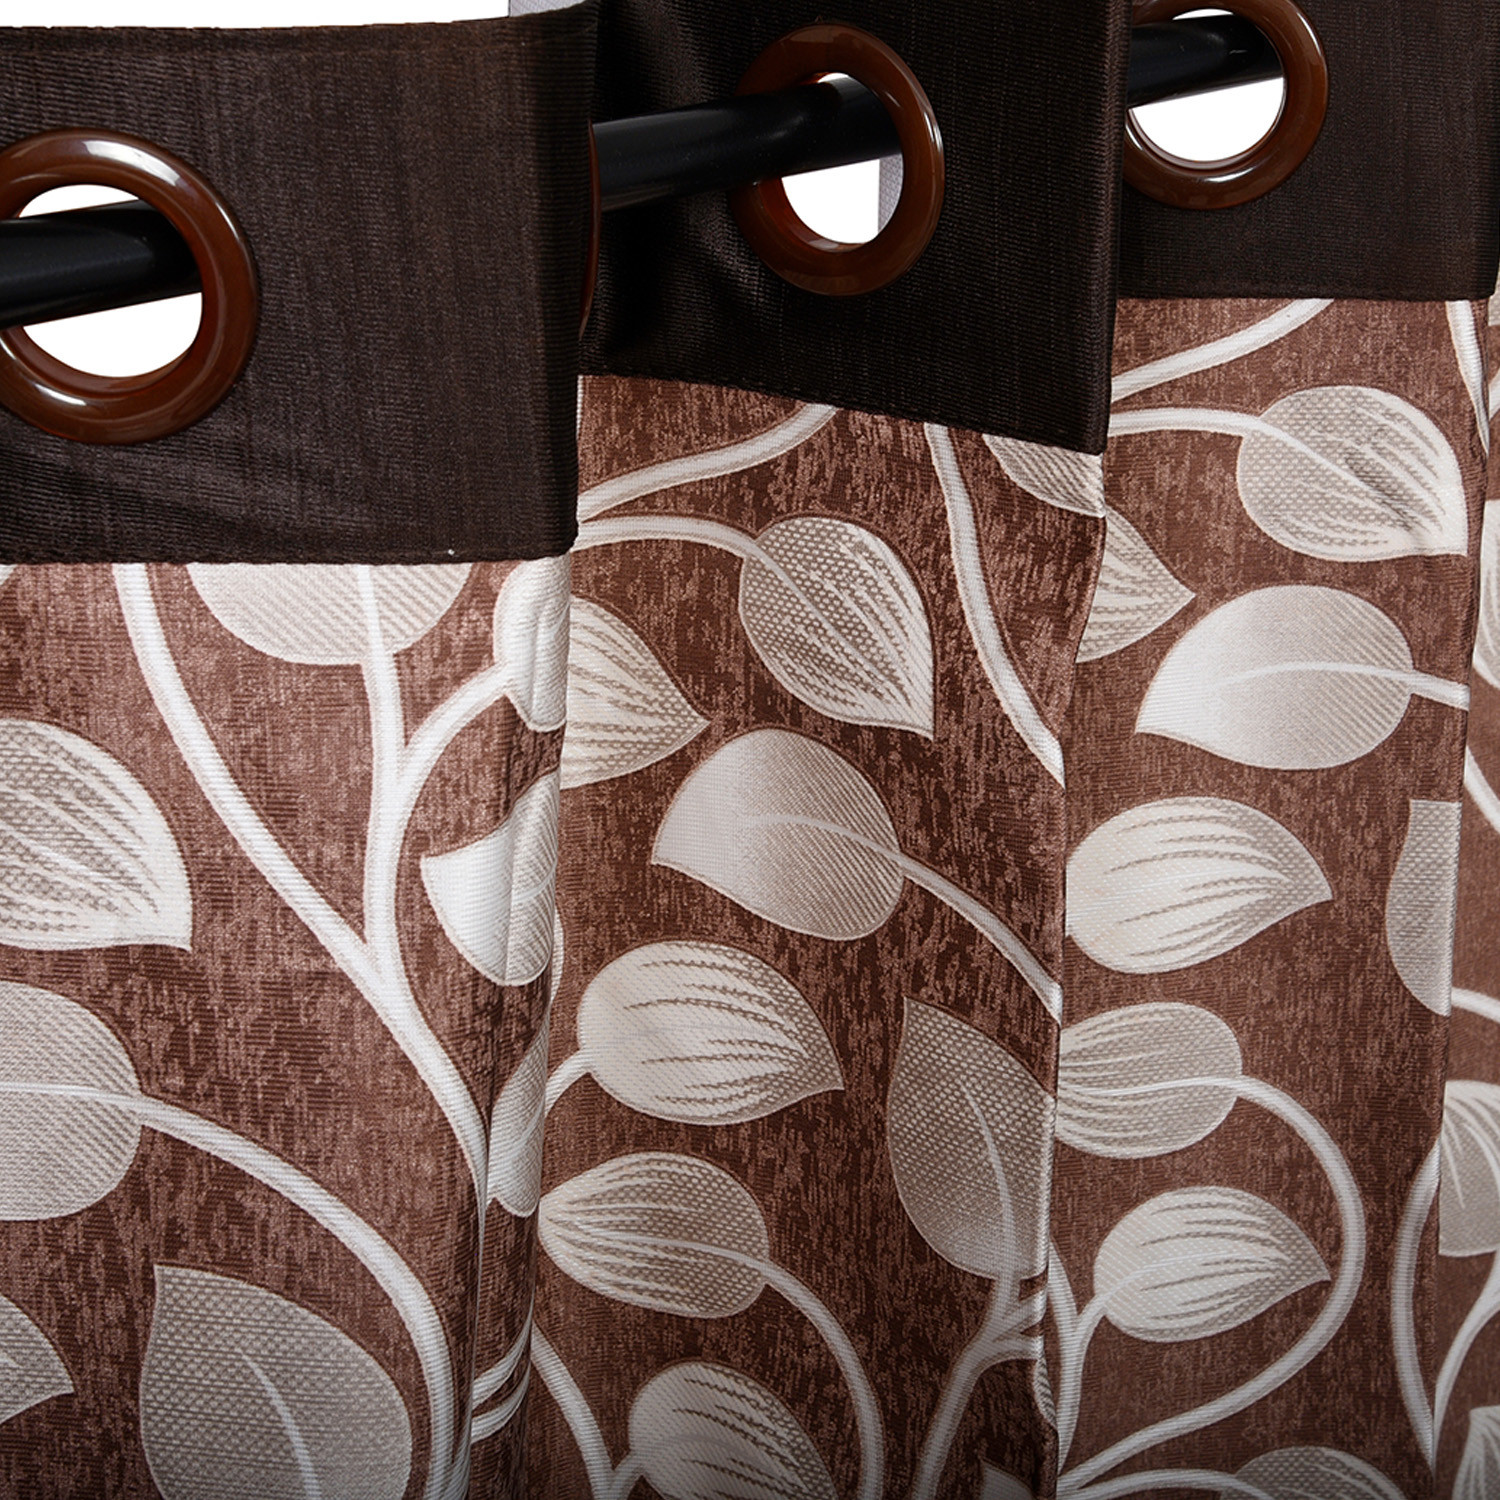 Kuber Industries Silk Decorative 7 Feet Door Curtain | Leaf Print Blackout Drapes Curtain With 8 Eyelet For Home & Office (Brown)